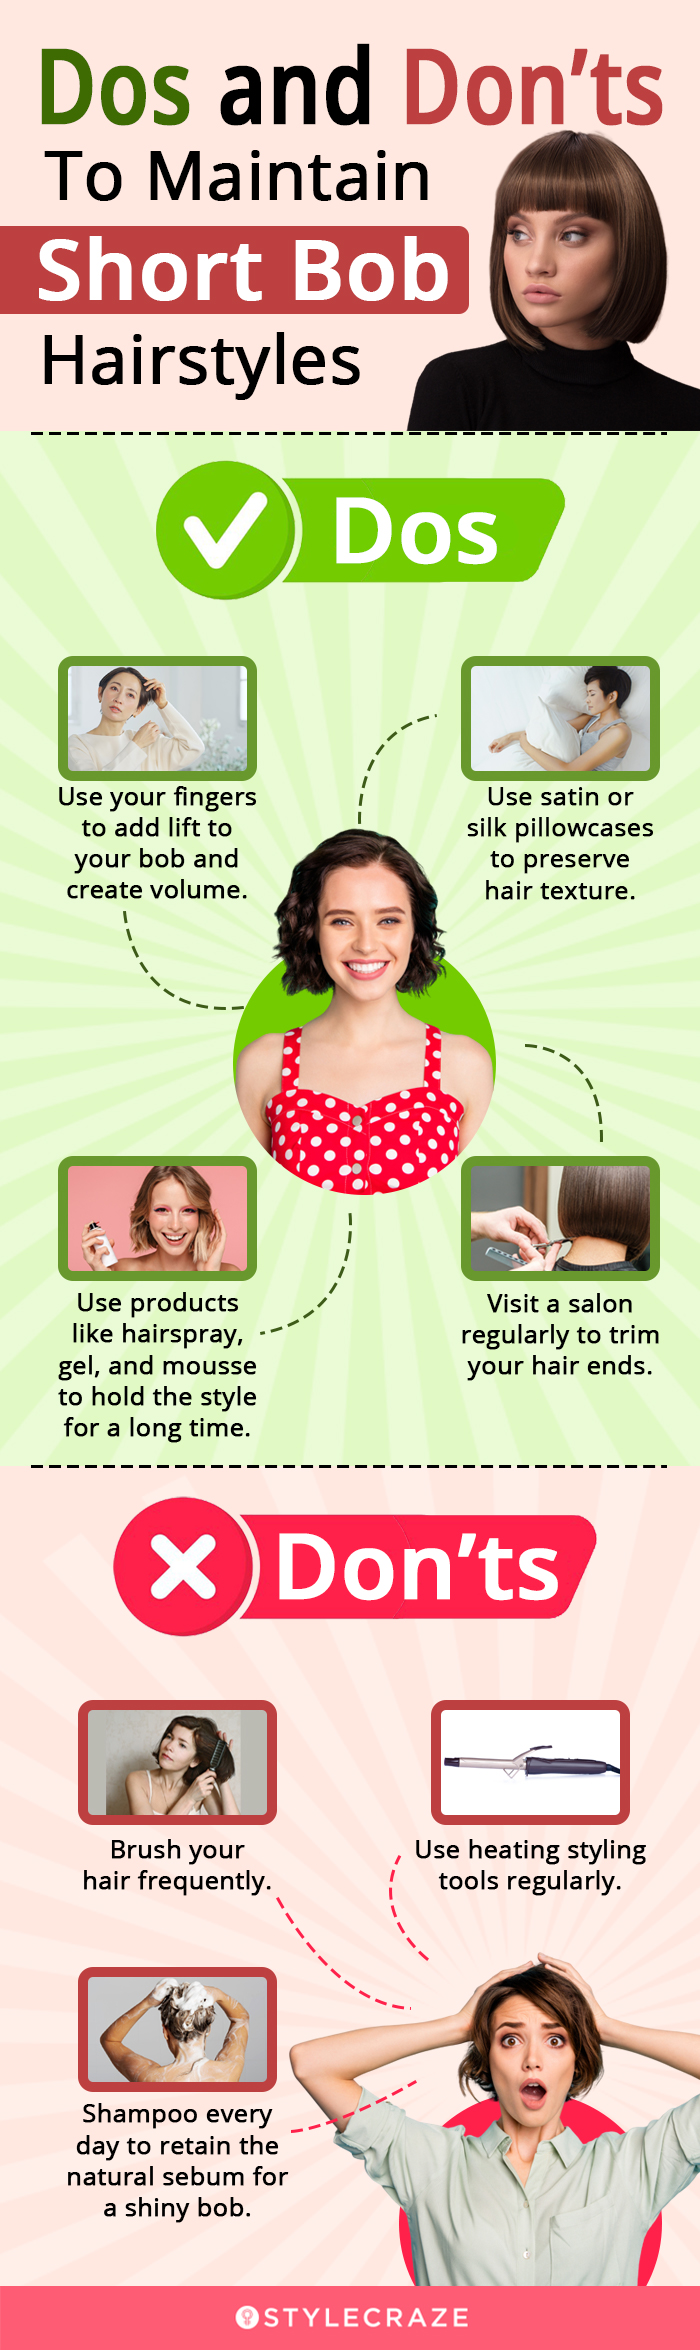 dos and don’ts to maintain short bob hairstyles [infographic]